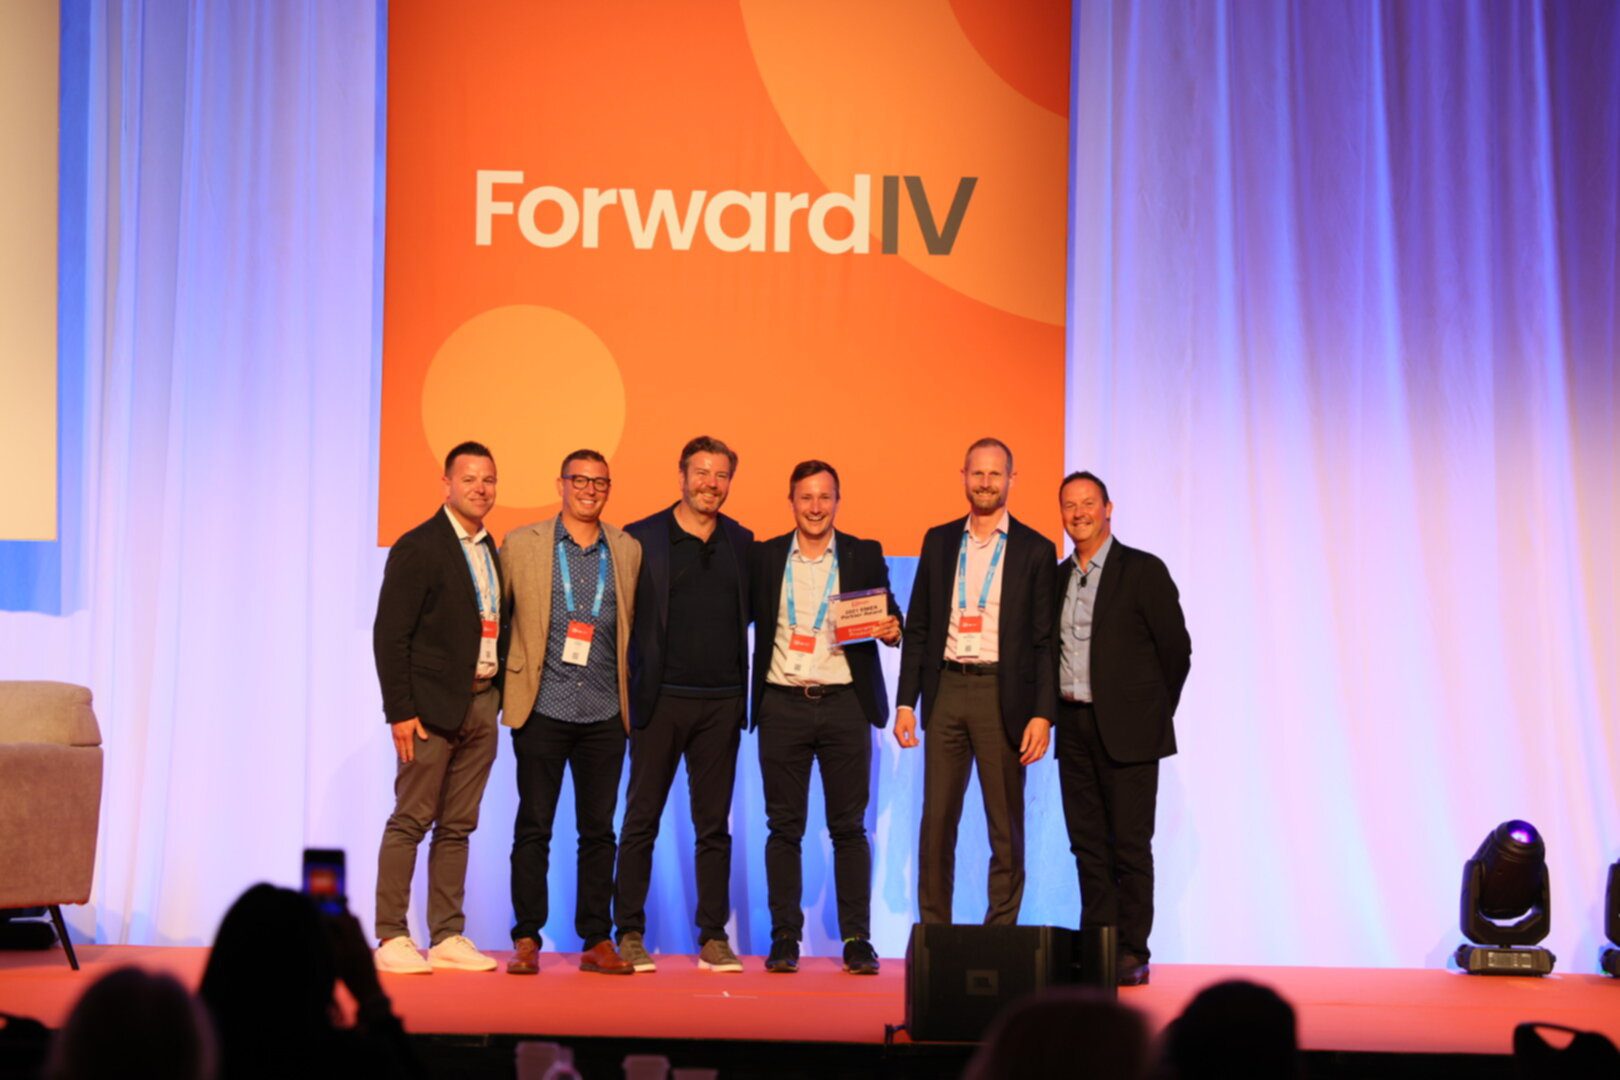 Roboyo team accepting award on stage at Forward